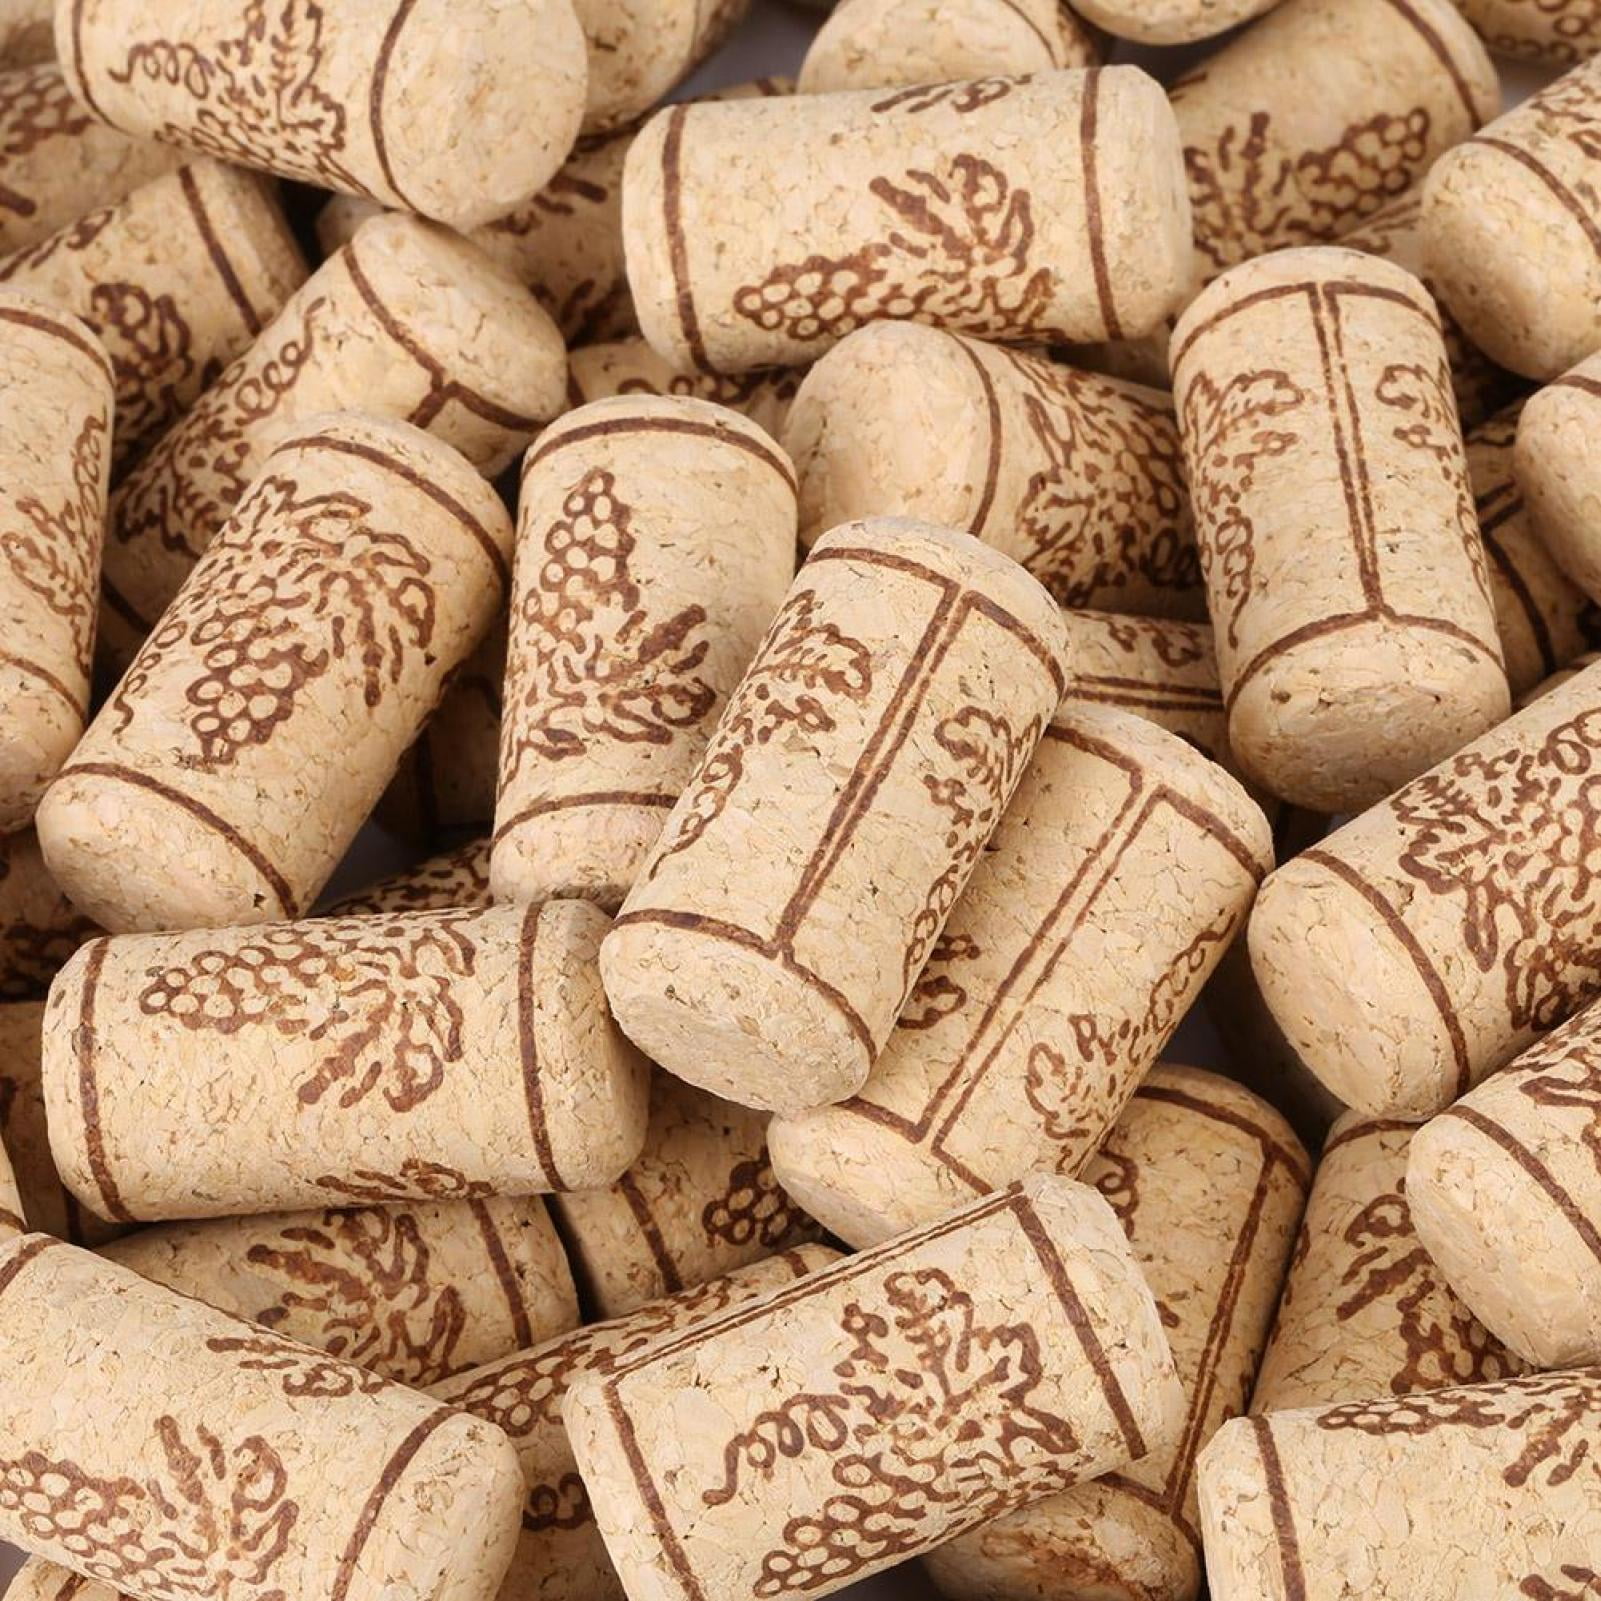 Bottle Corks Premium Straight Cork Stopper for Corking Homemade Wine Making with Home Corker or Craft Cork Supply for DIY Art Winecork Projects 100Count Wine Bottle Corks 